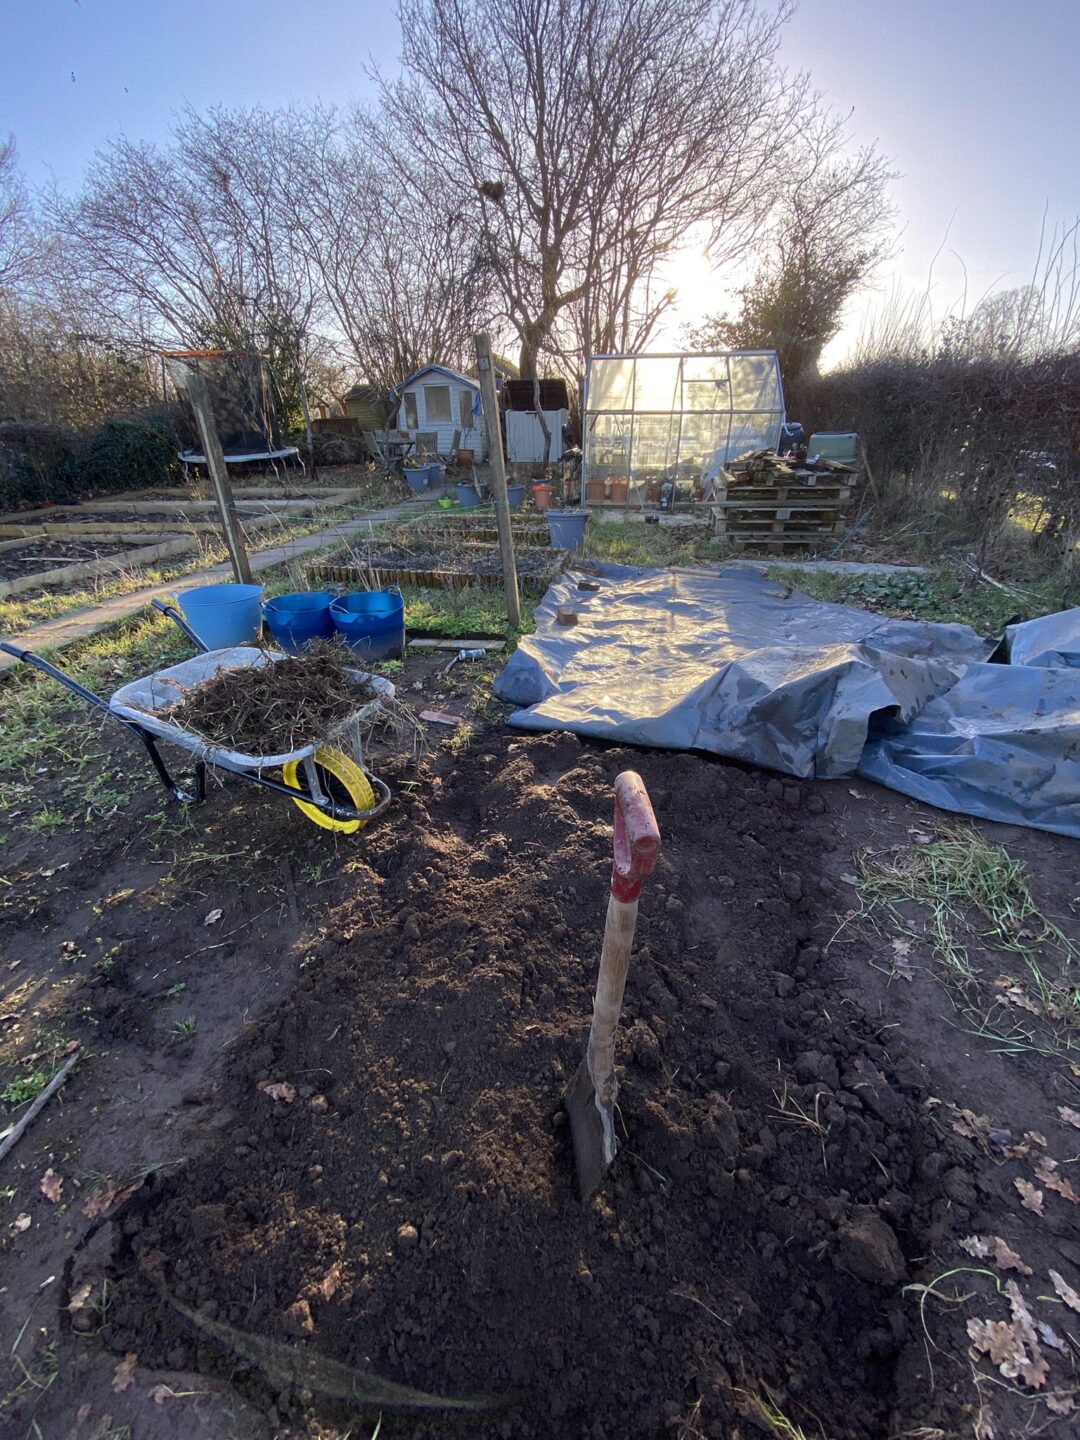 View of my allotment while I dig on a sunny winter day. Spade in the ground, wheelbarrow to the left, old greenhouse with sun shining through directly ahead.